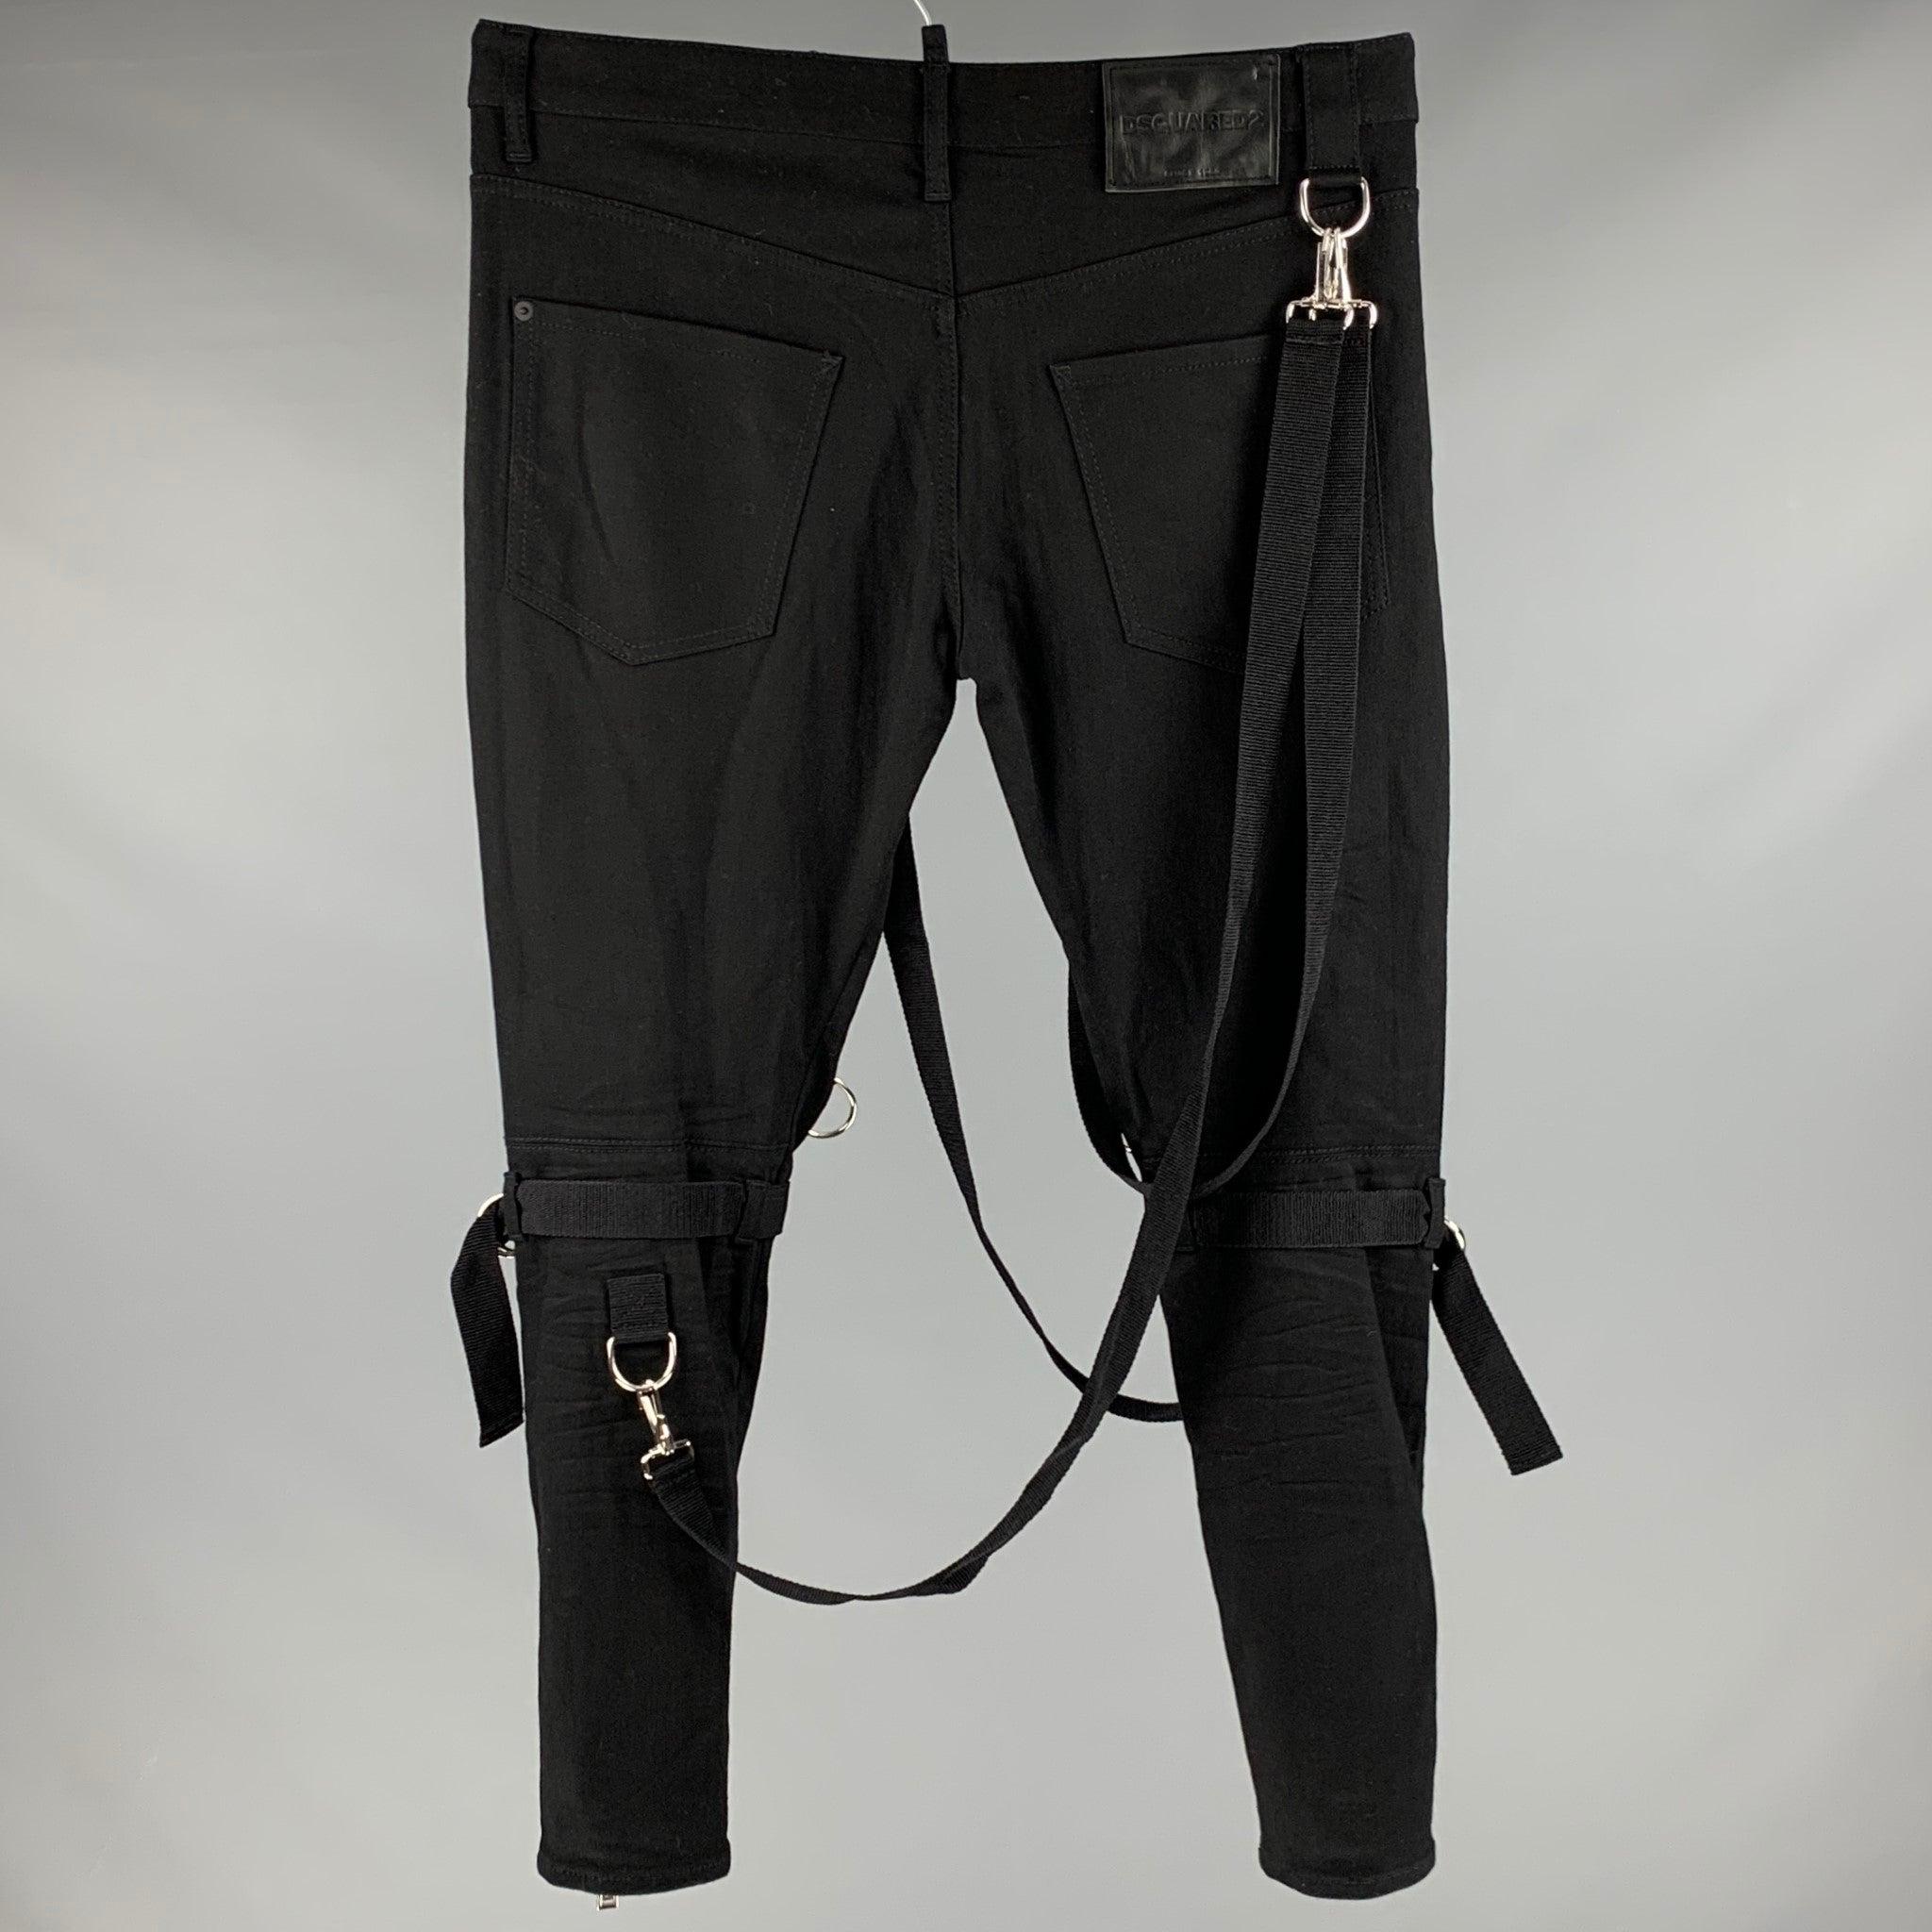 DSQUARED2 casual pants in a black cotton blend fabric featuring bondage-style, versatile straps, zipper pockets and details throughout, and button fly closure. Made in Italy.Very Good Pre-Owned Condition. Minor signs of wear. 

Marked:   52